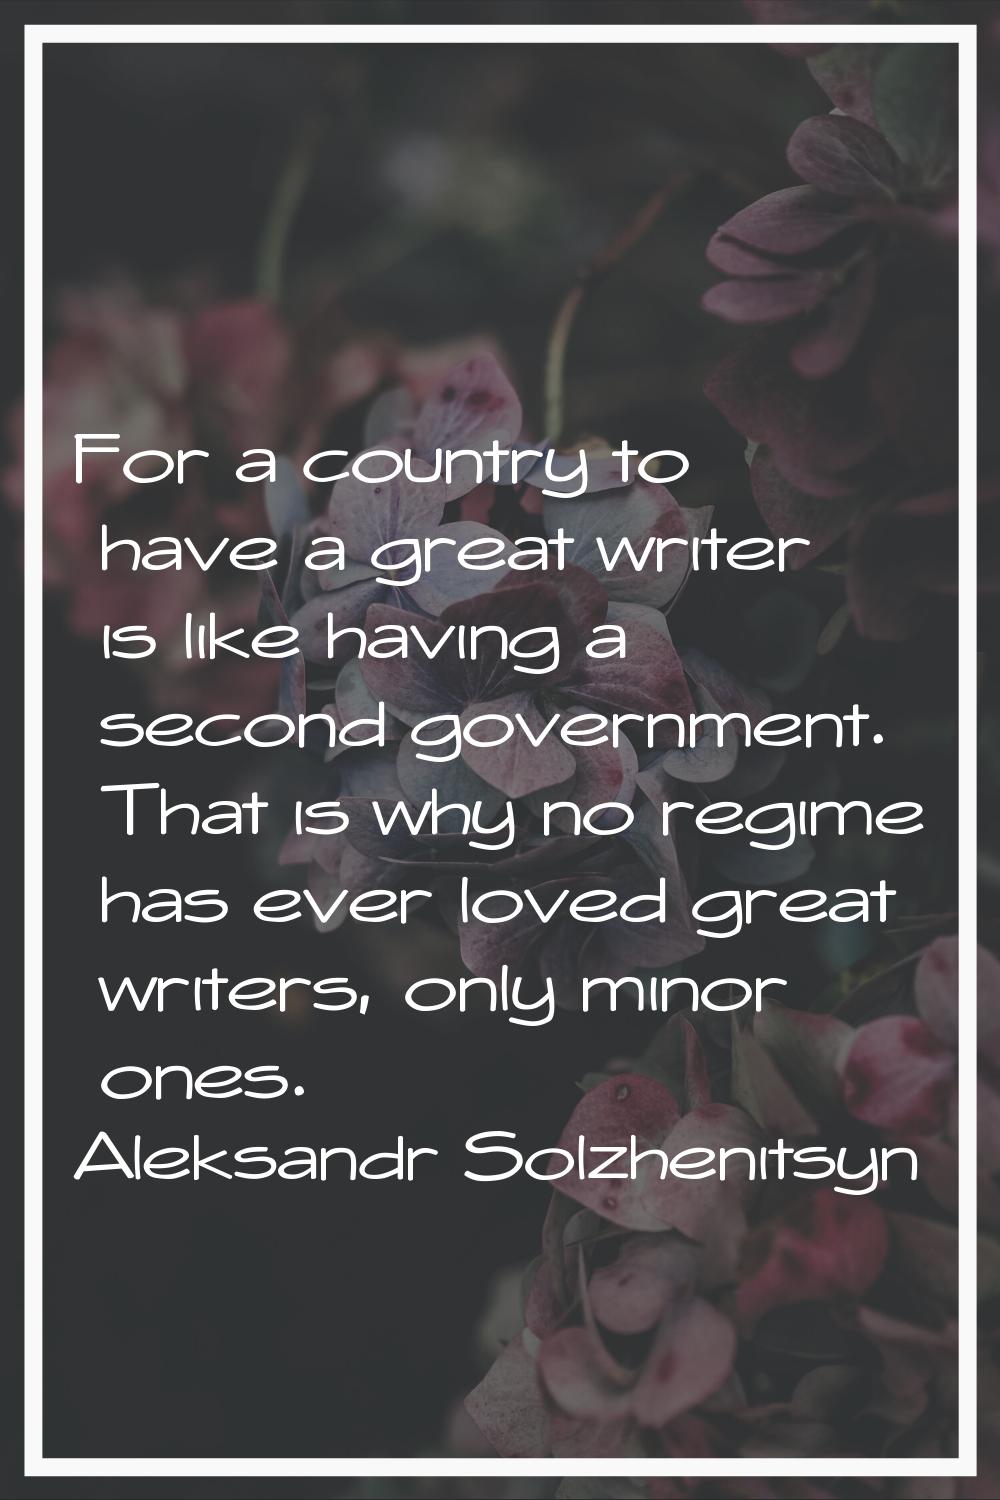 For a country to have a great writer is like having a second government. That is why no regime has 